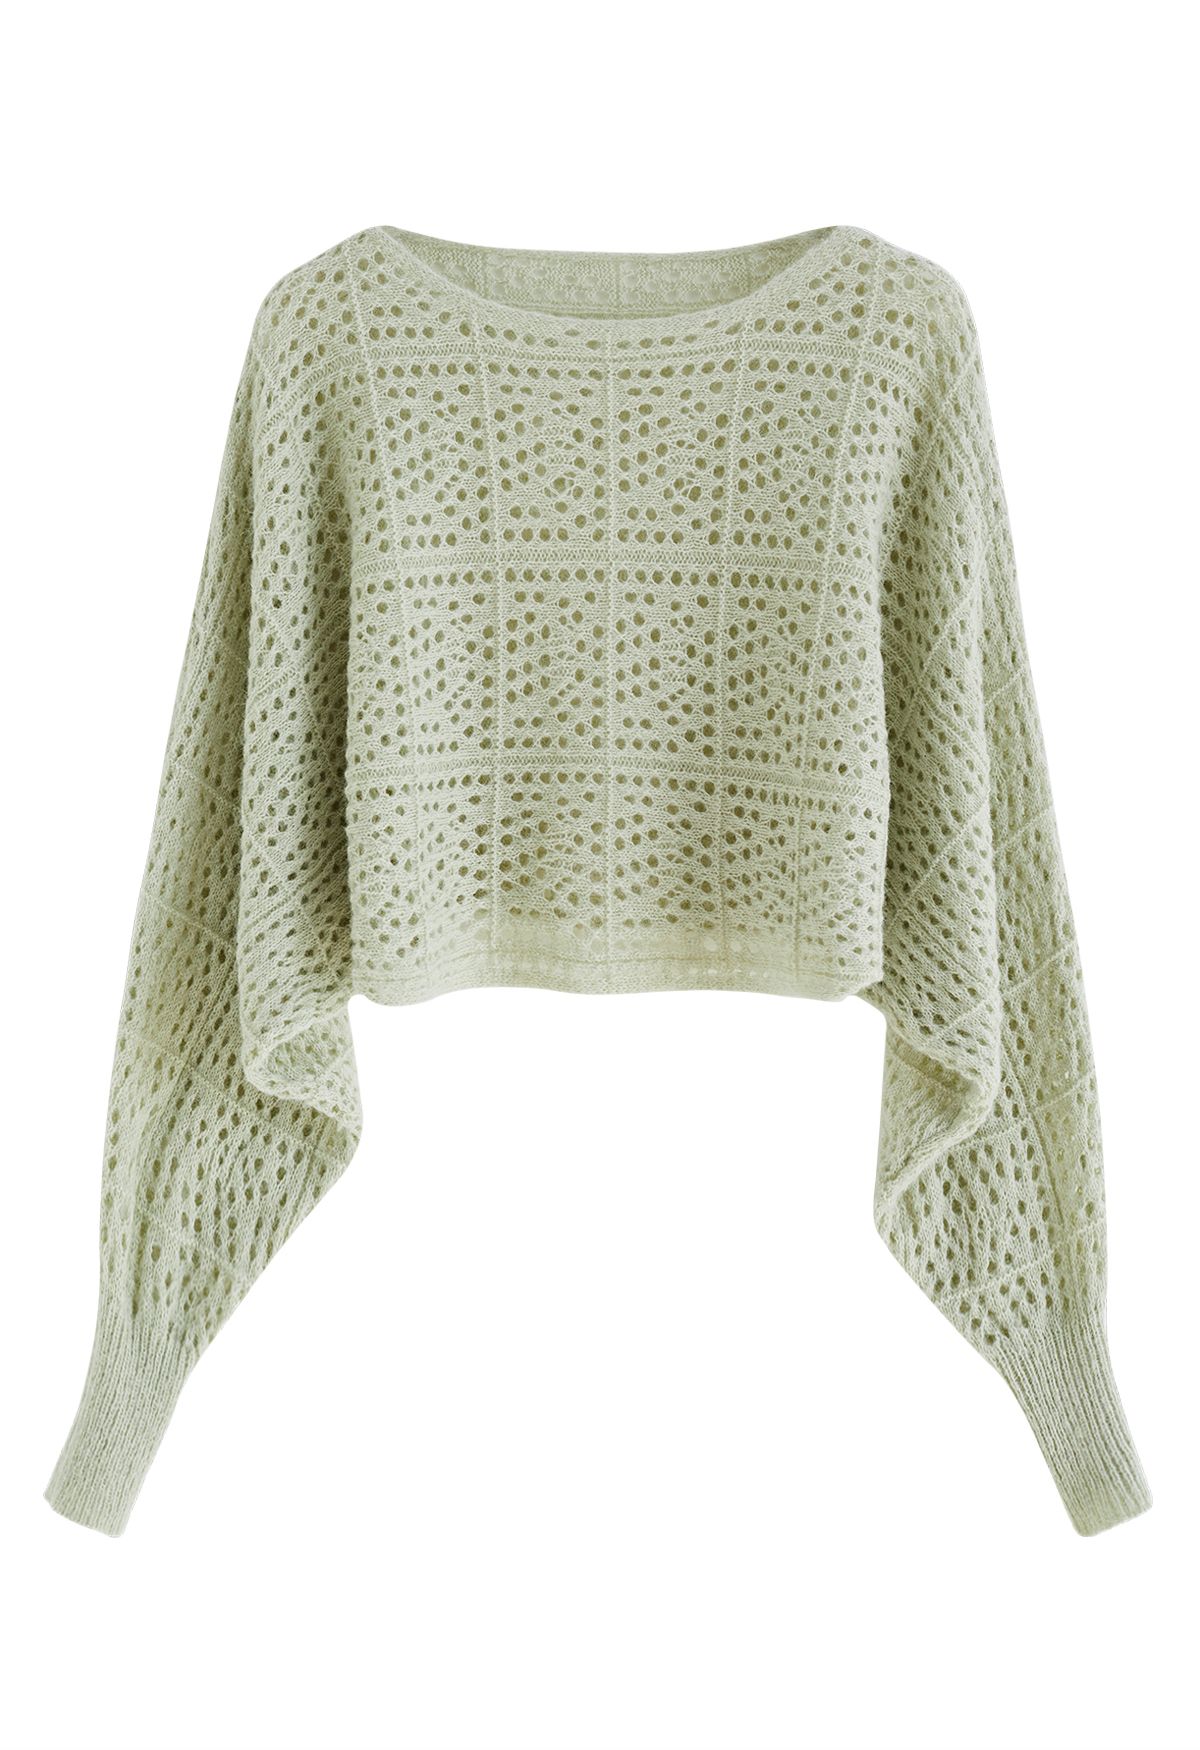 Batwing Sleeve Pointelle Knit Crop Top in Pea Green